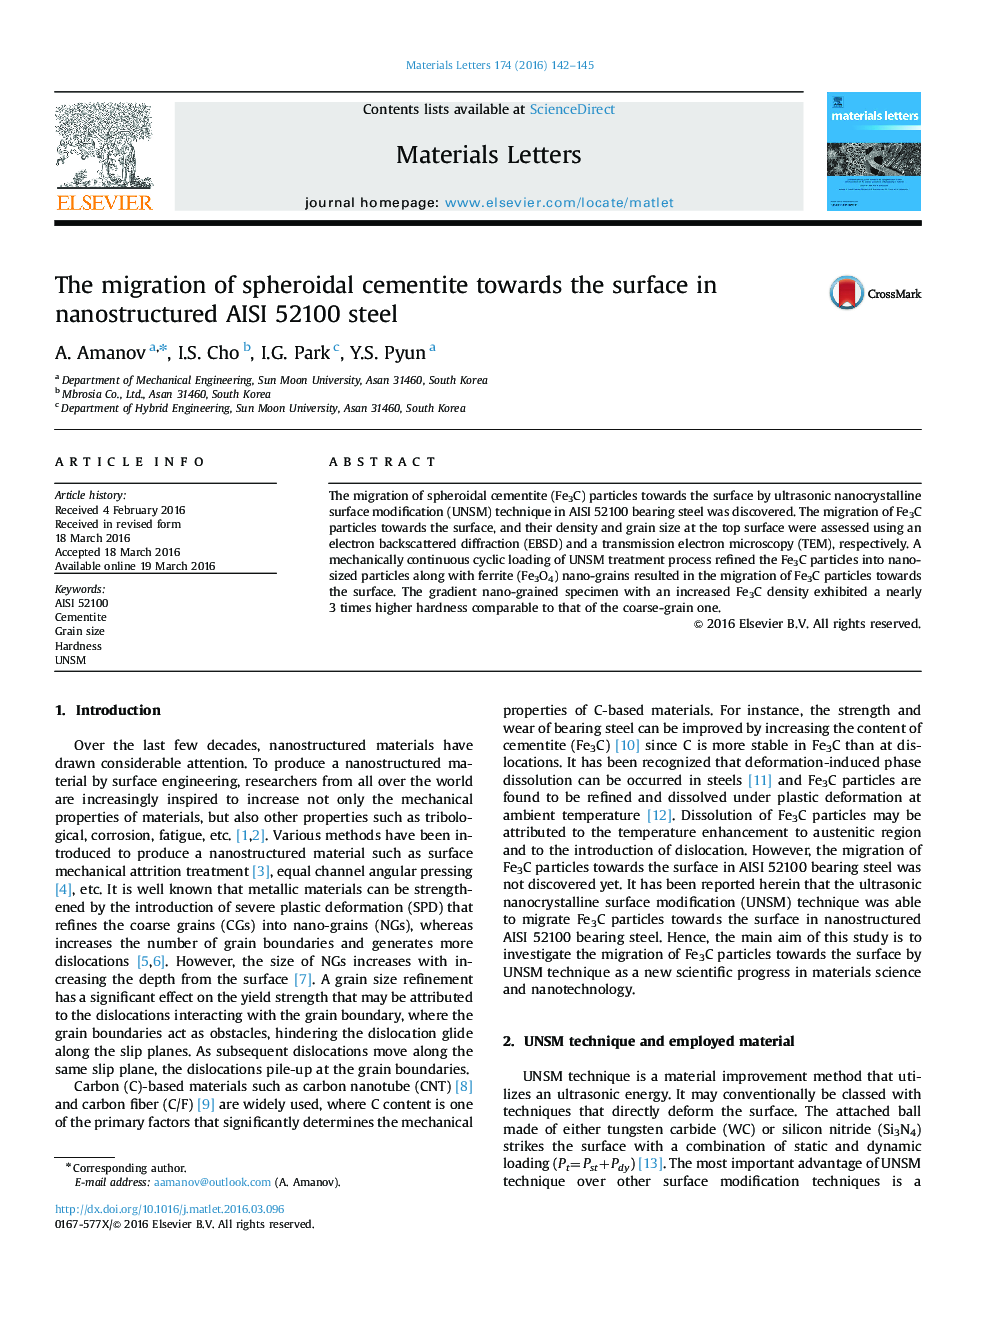 The migration of spheroidal cementite towards the surface in nanostructured AISI 52100 steel